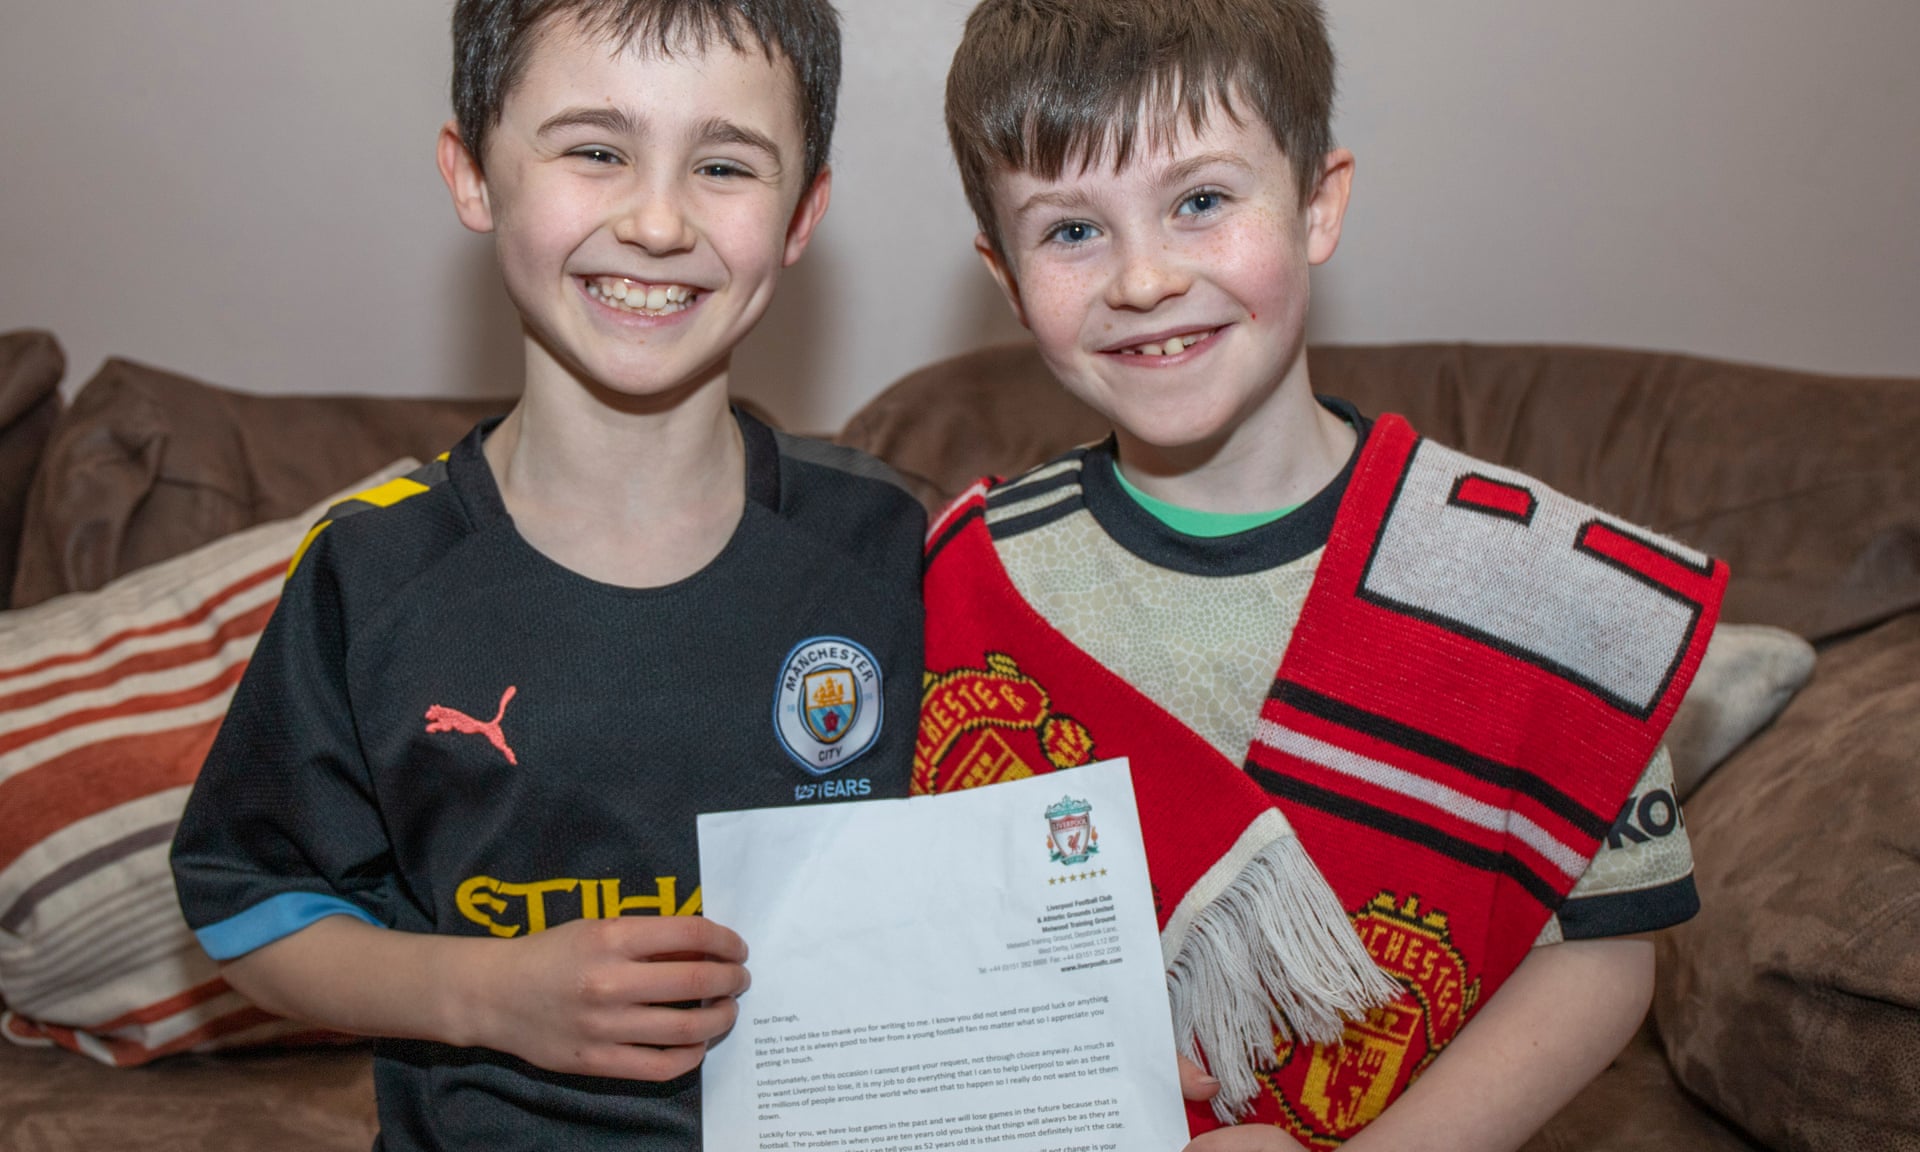 Manchester United fan, Daragh Curley (right), and his brother Dylan, a Manchester City fan, with his letter from Liverpool’s  Jürgen Klopp.